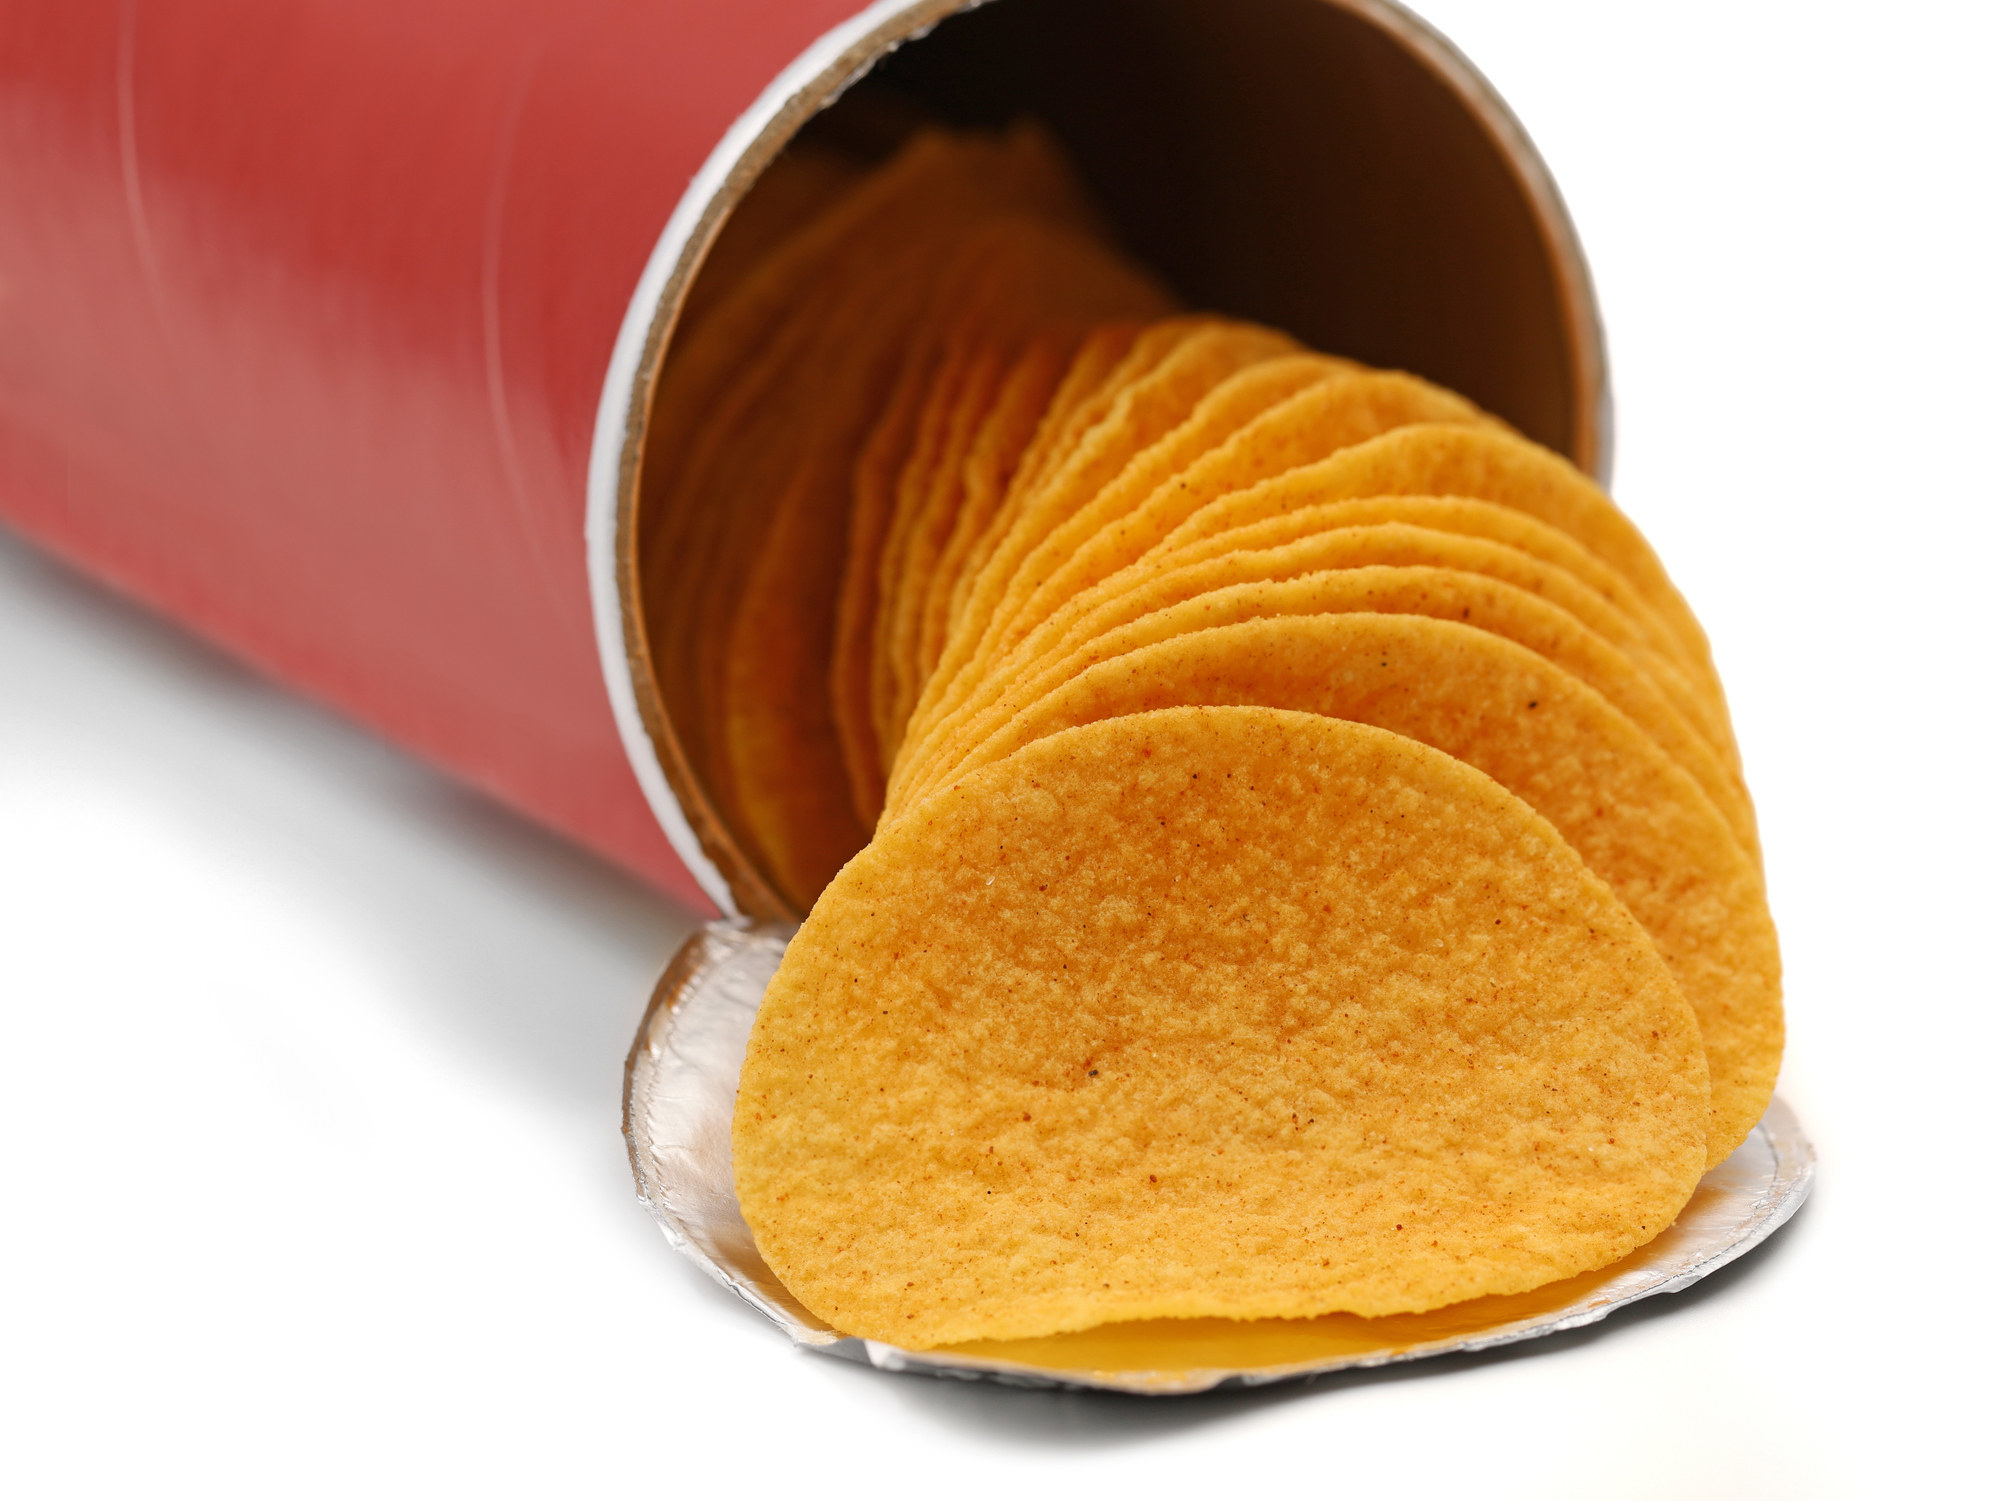 Pringles coming out of a can